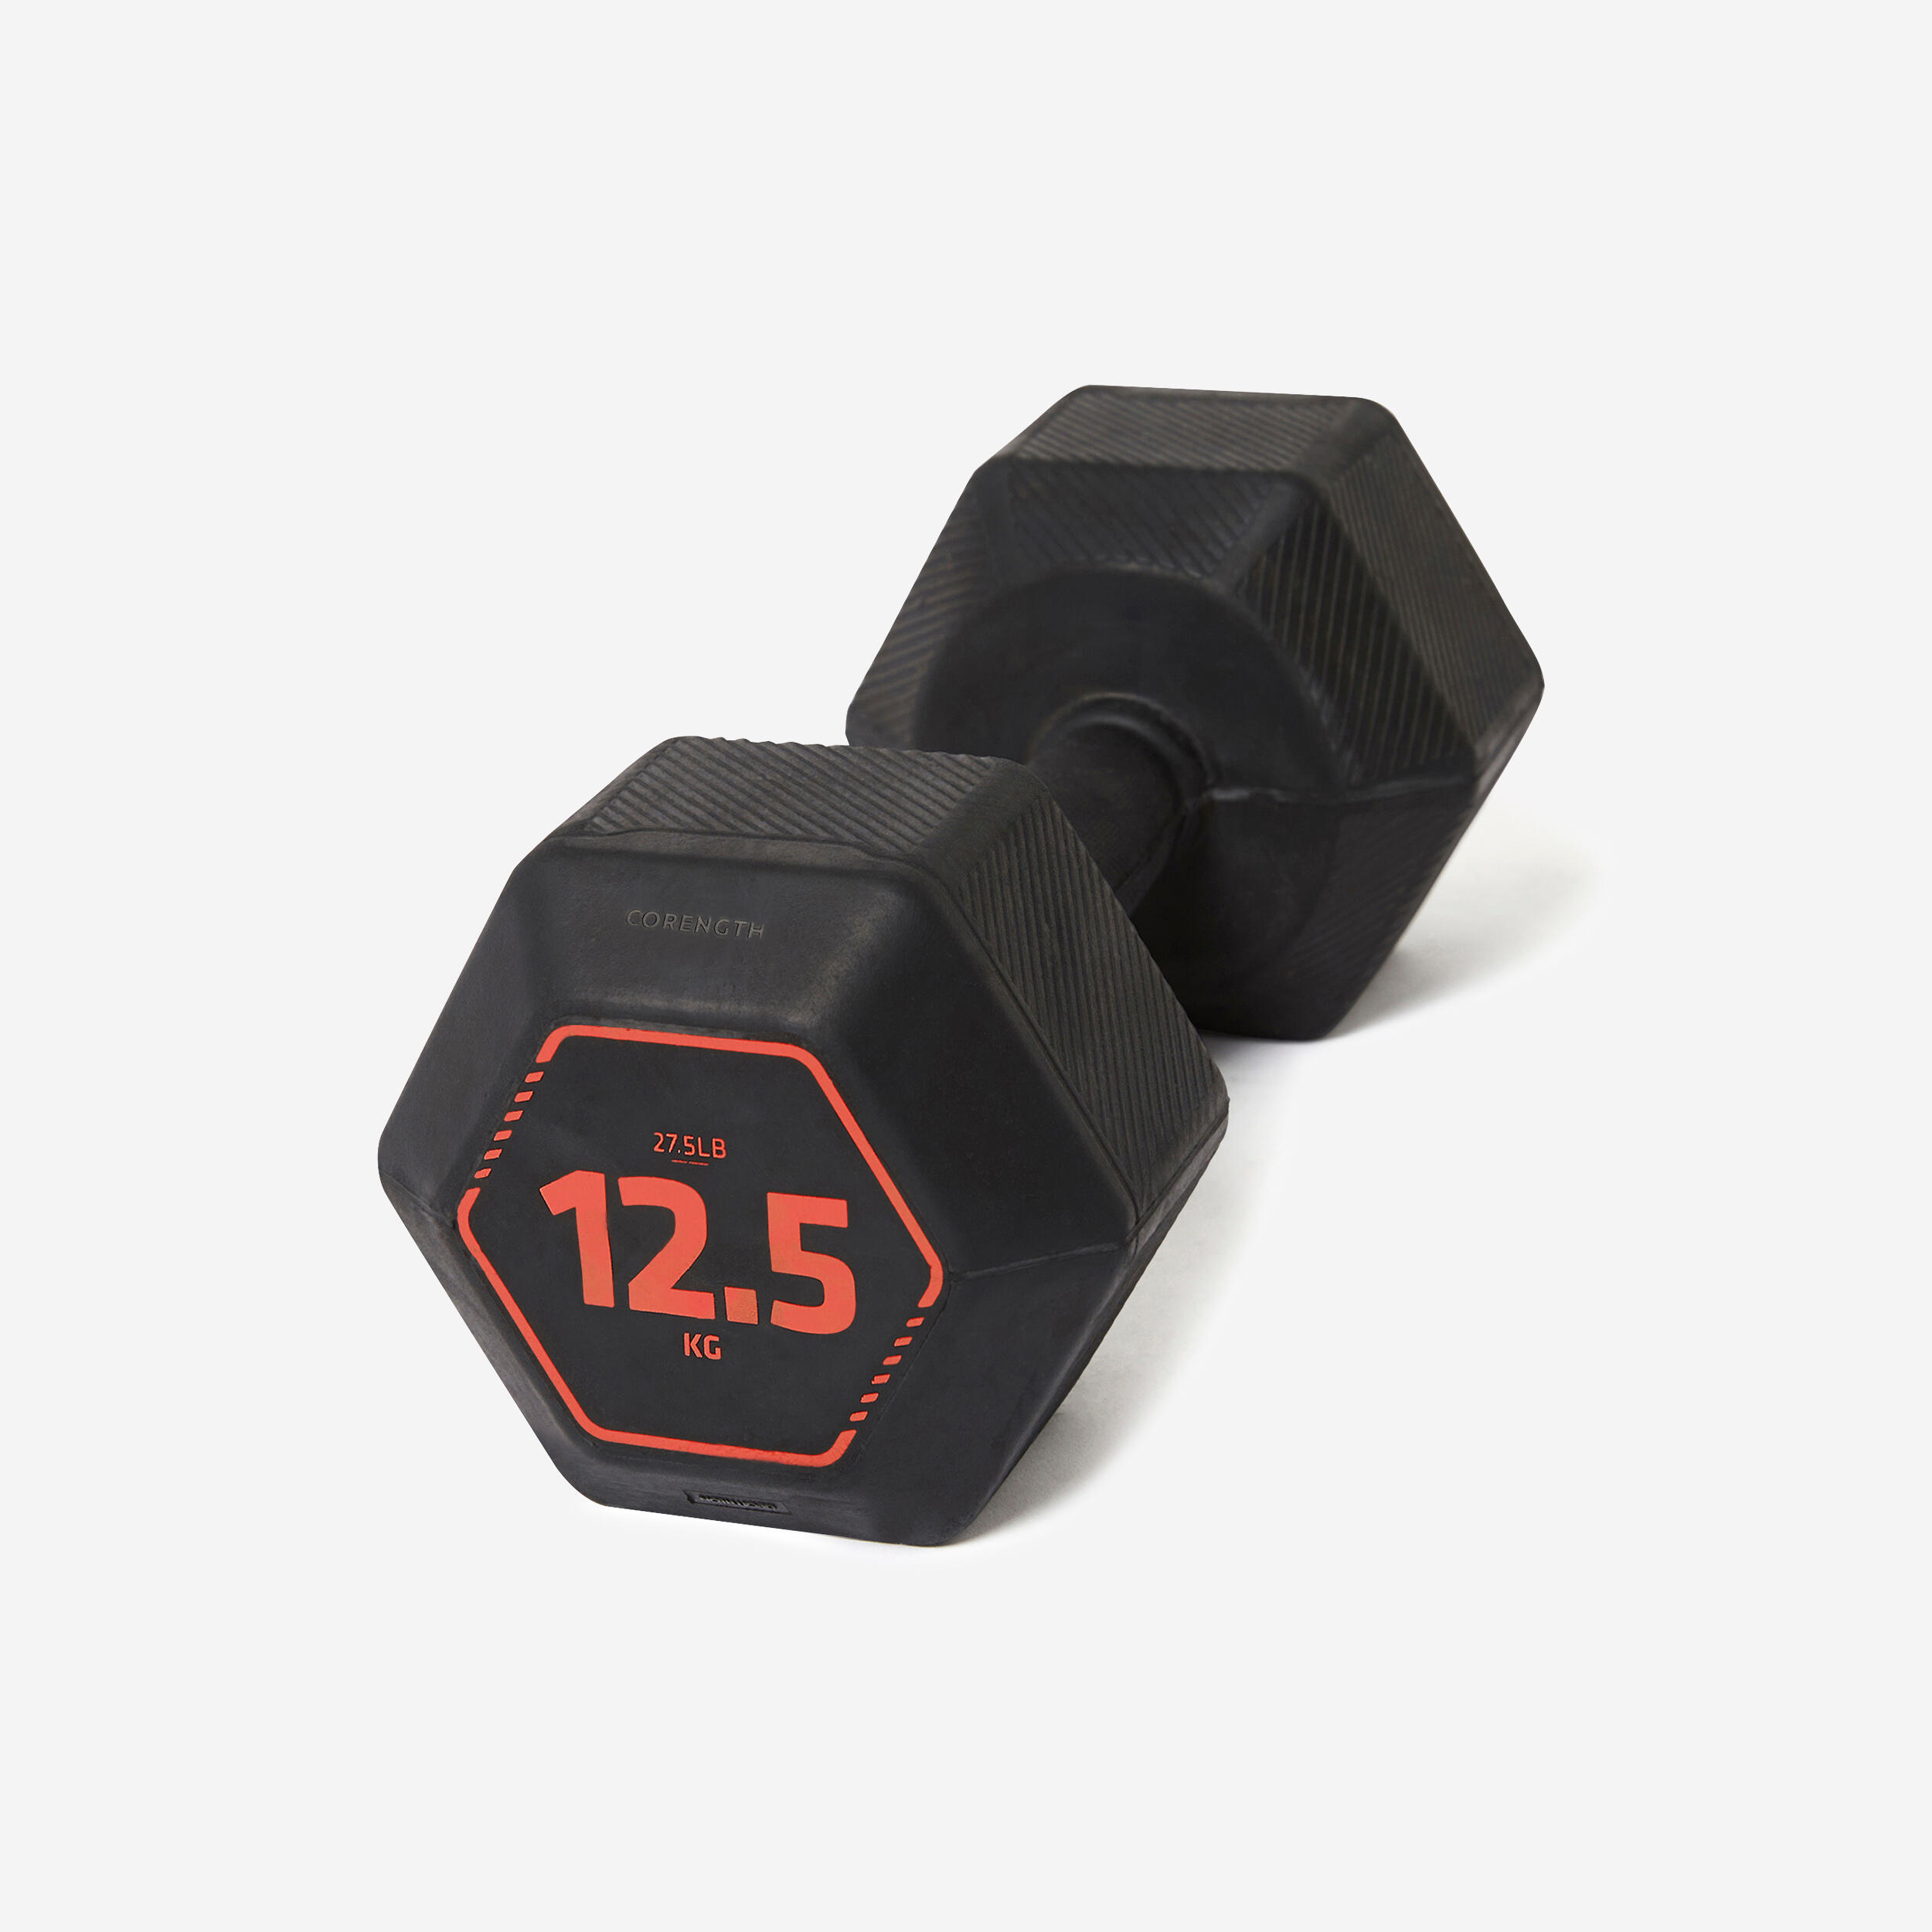 Corength Cross Training And Weight Hex Dumbbells 12.5kg - Black